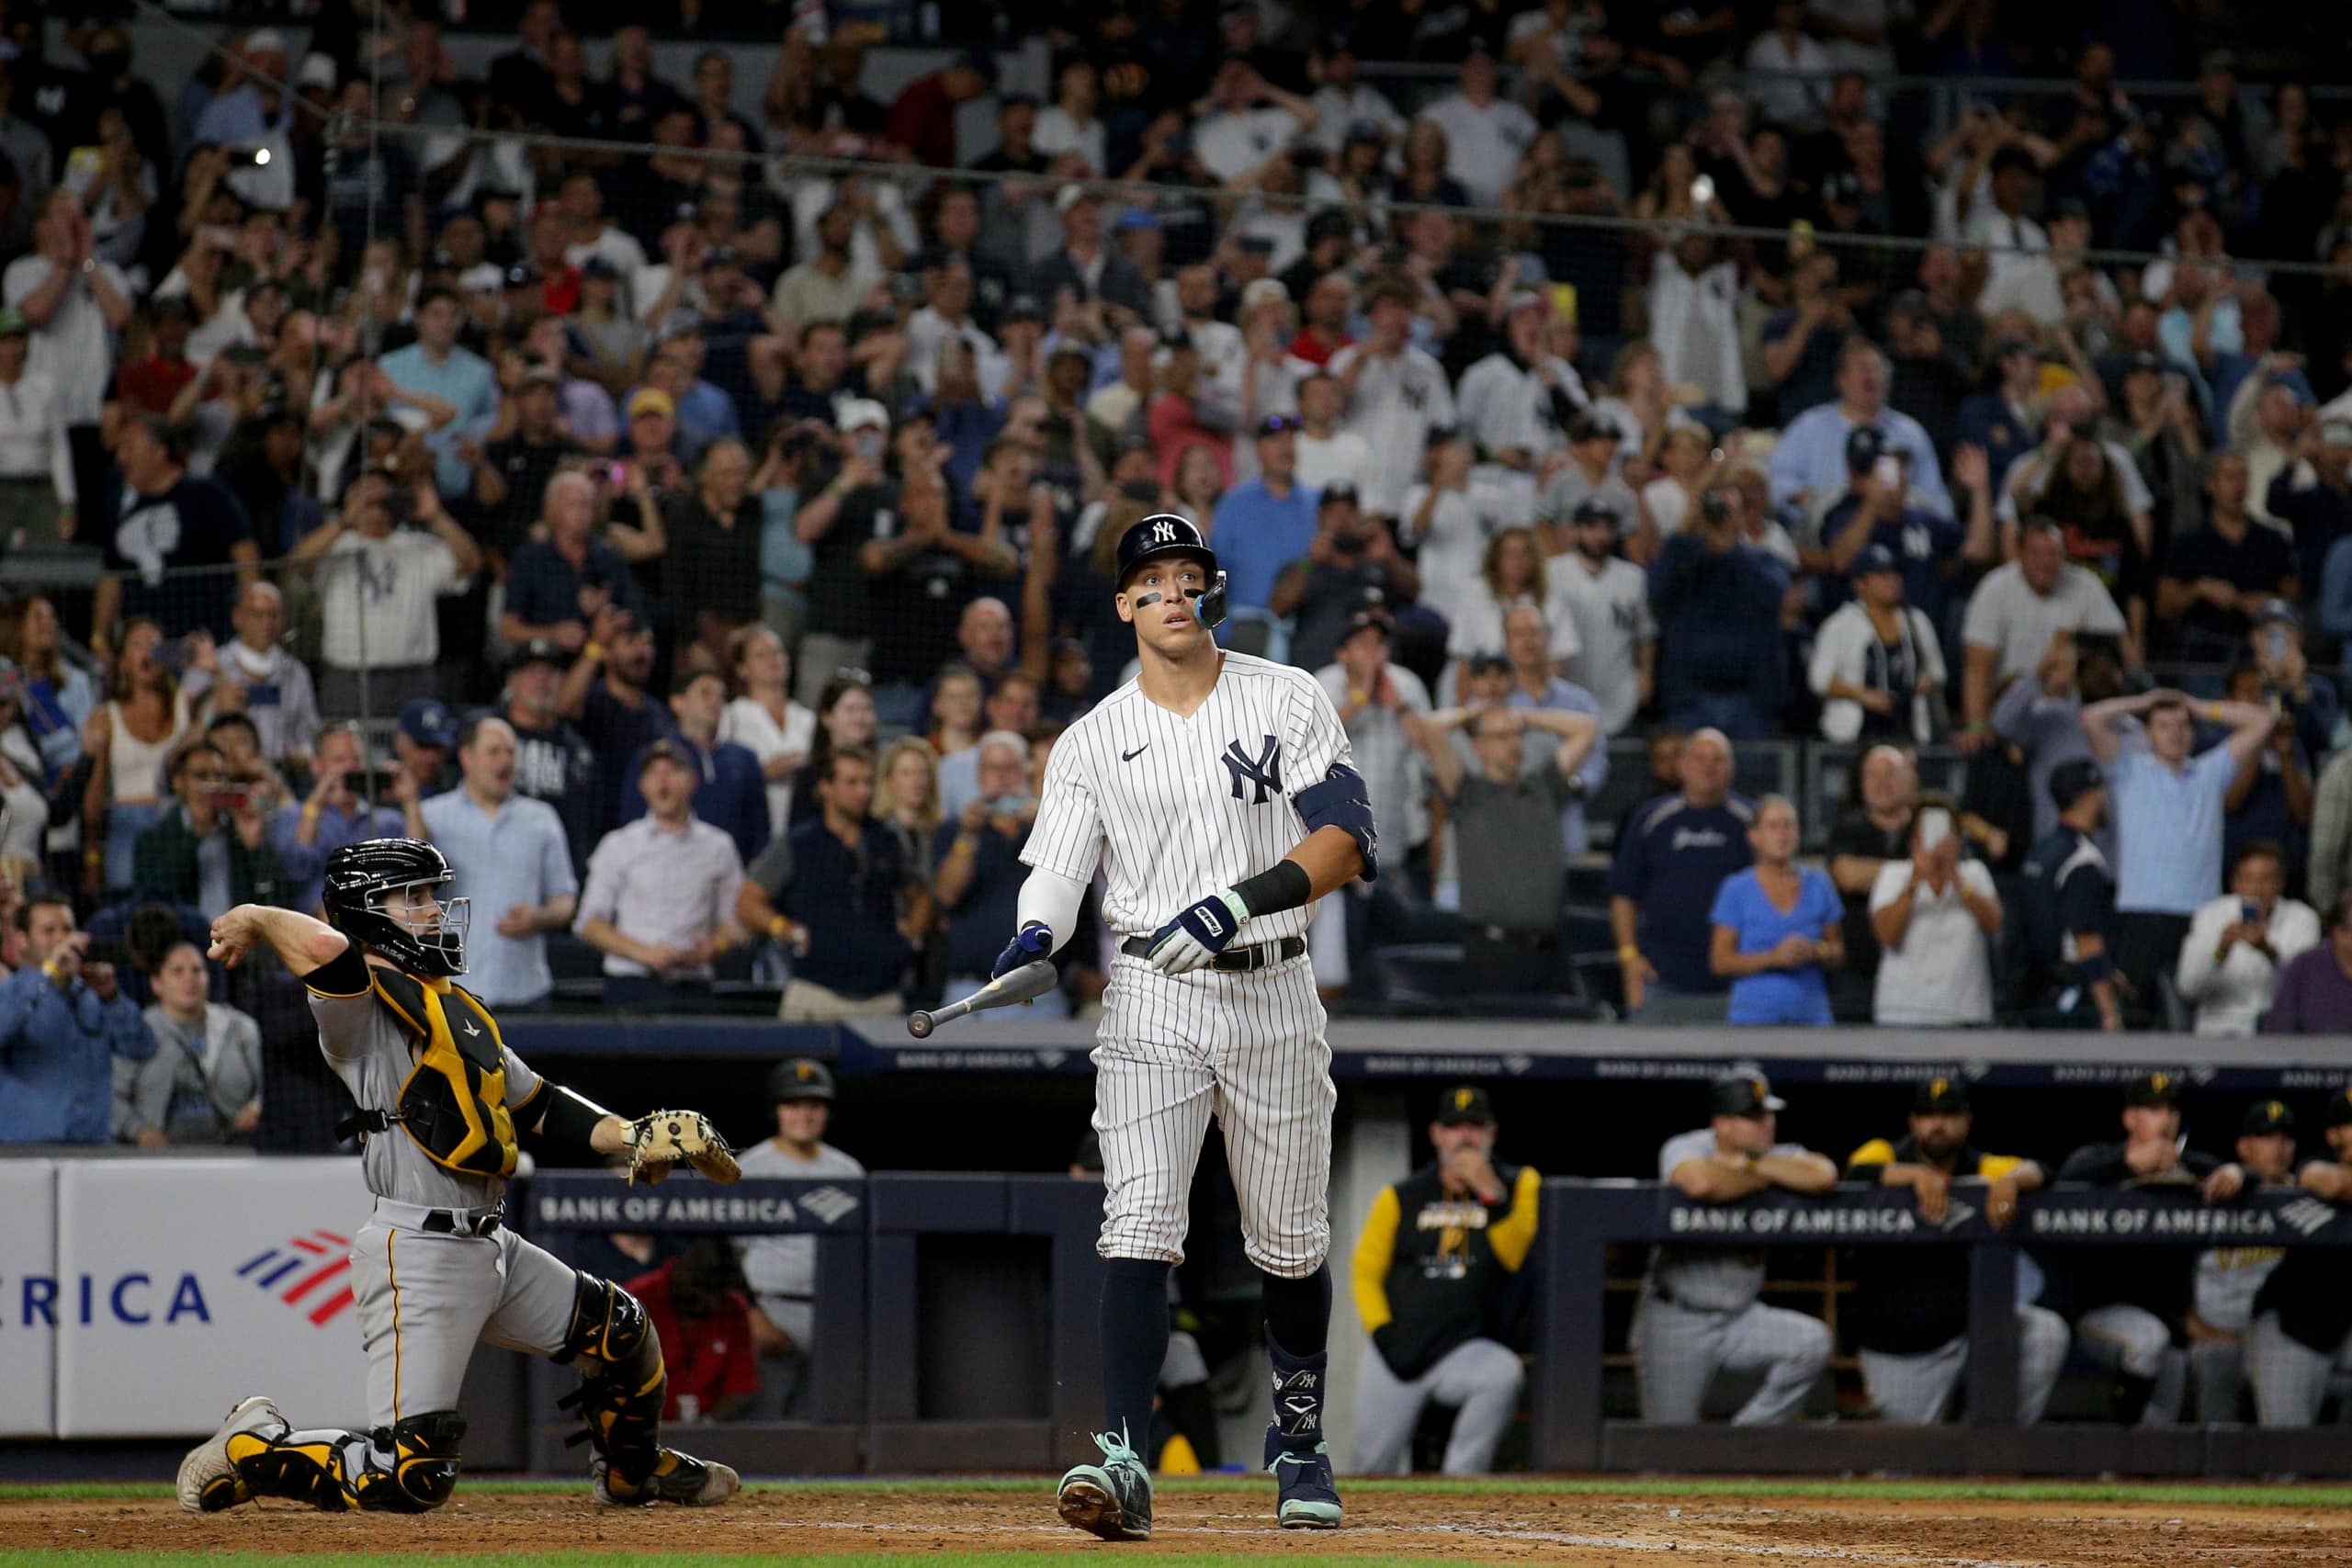 Yankees Ticket Sales Soaring Amid Aaron Judge's Record Chase